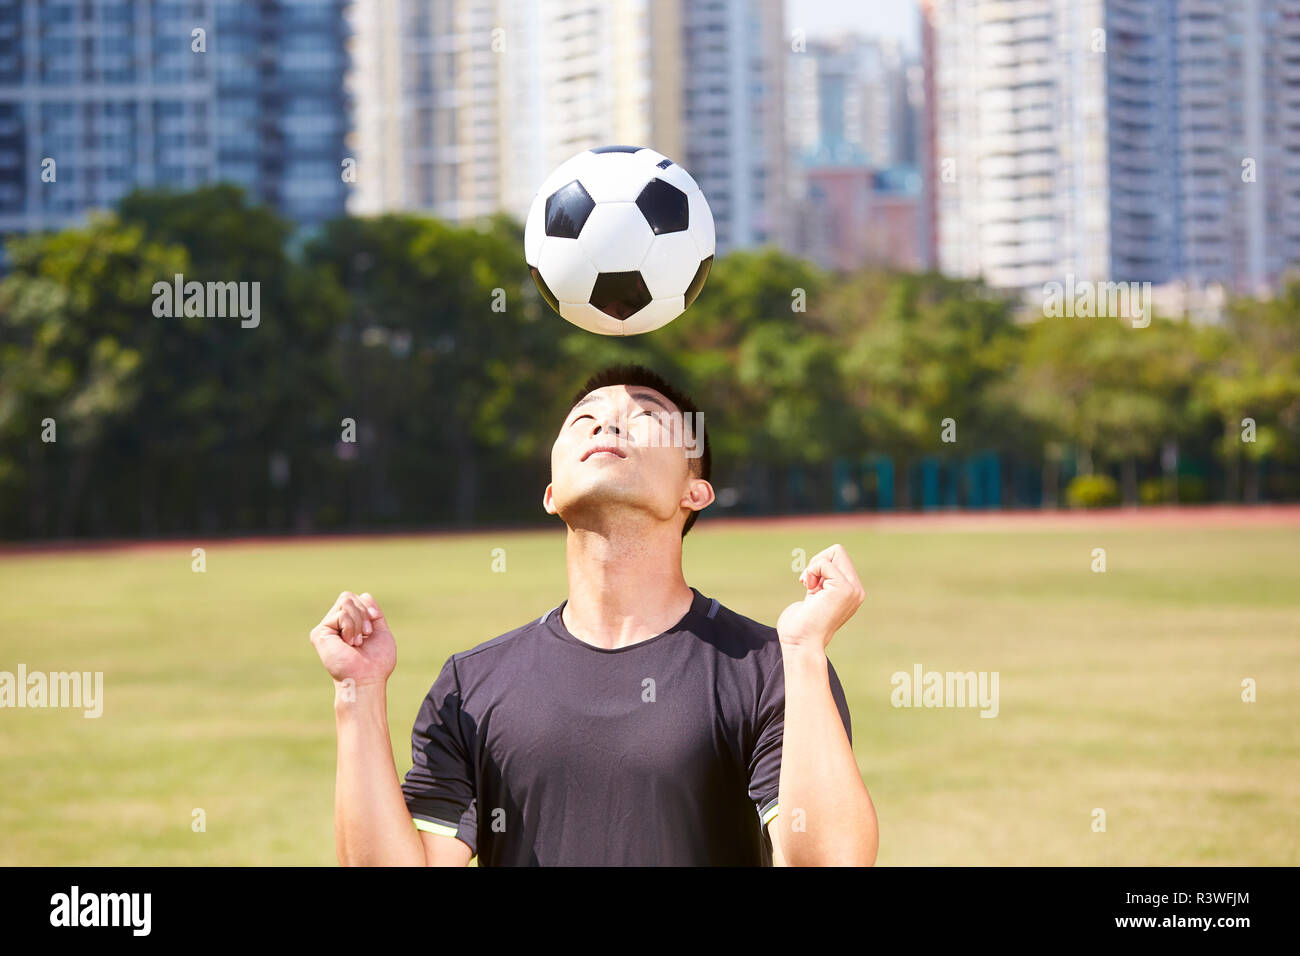 asian soccer football player practicing ball skill on outdoor field Stock Photo